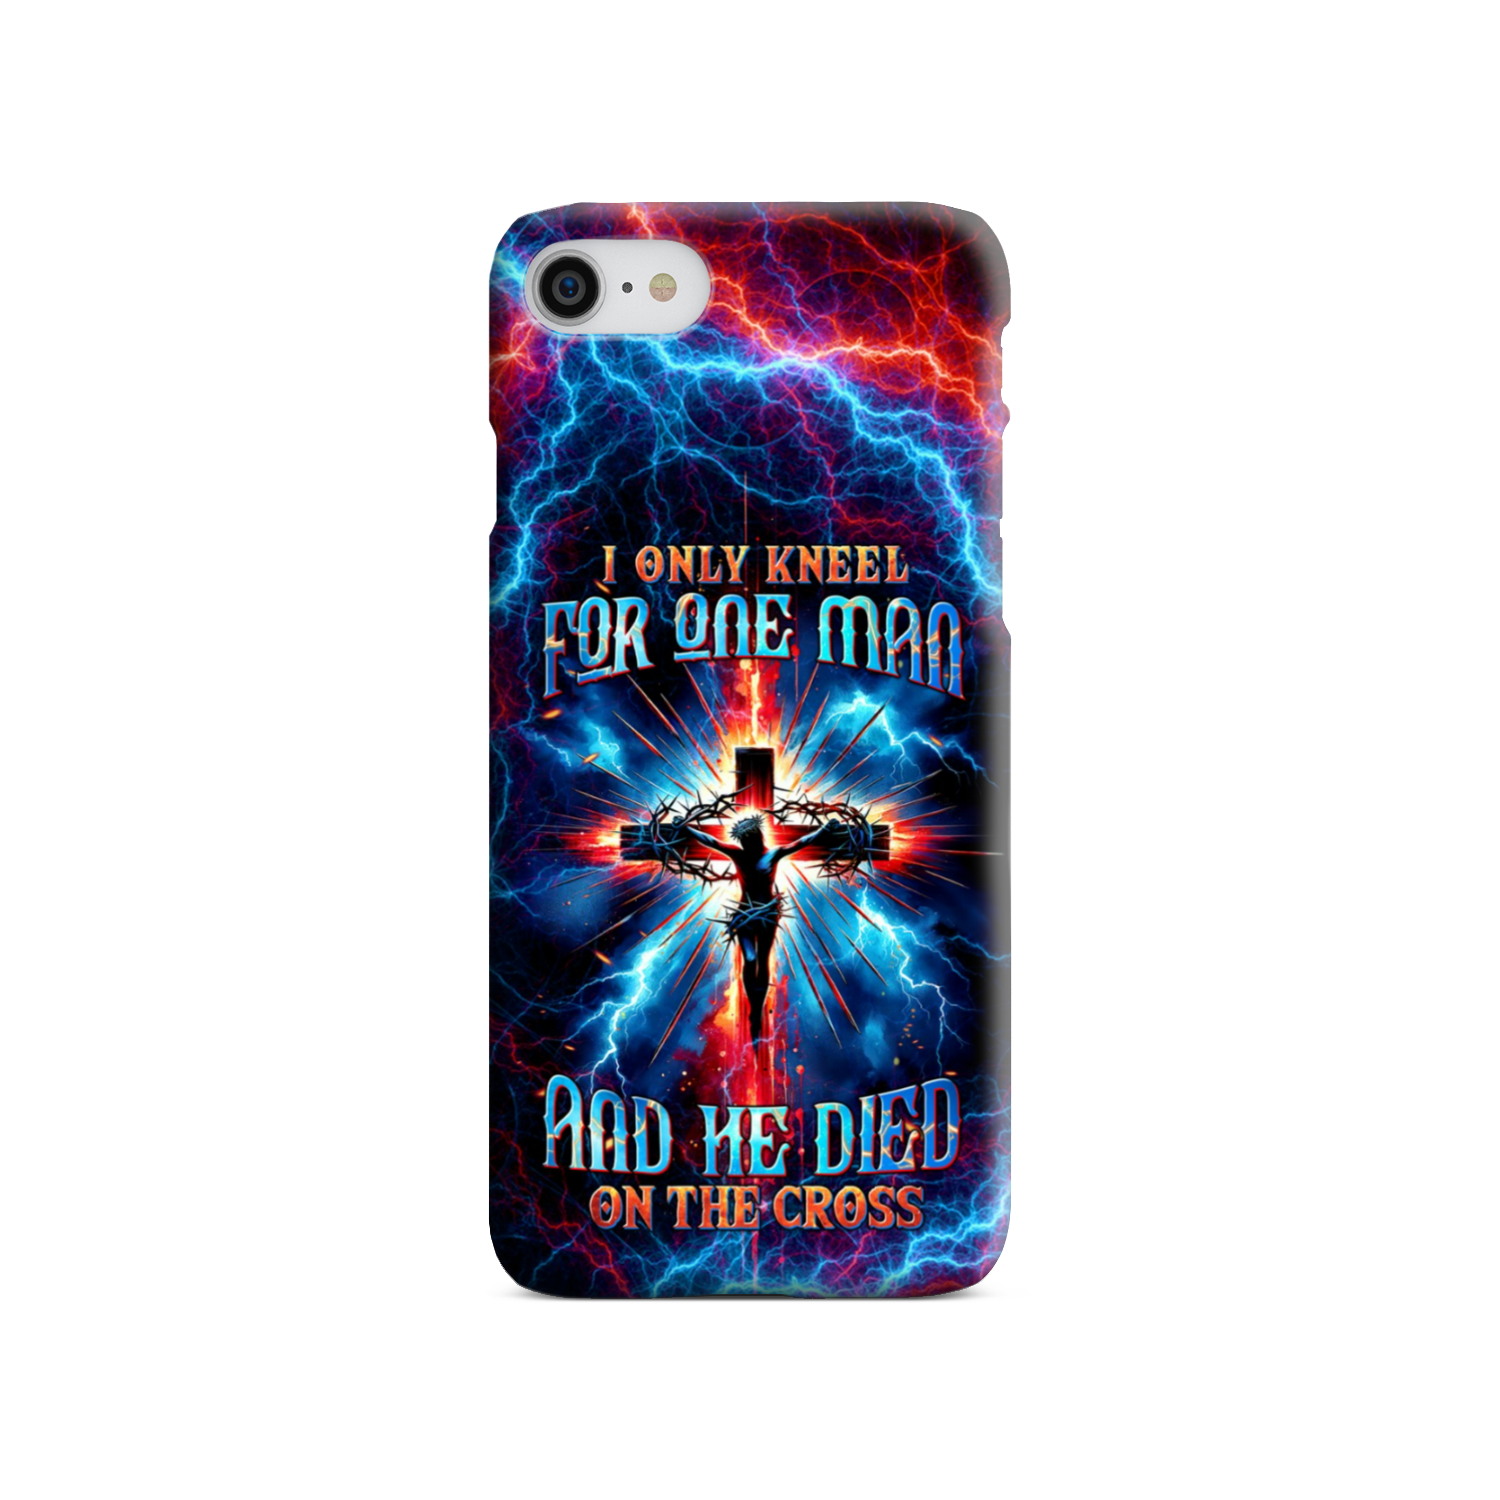 I Only Kneel For One Man Phone Case - Tltw0204241